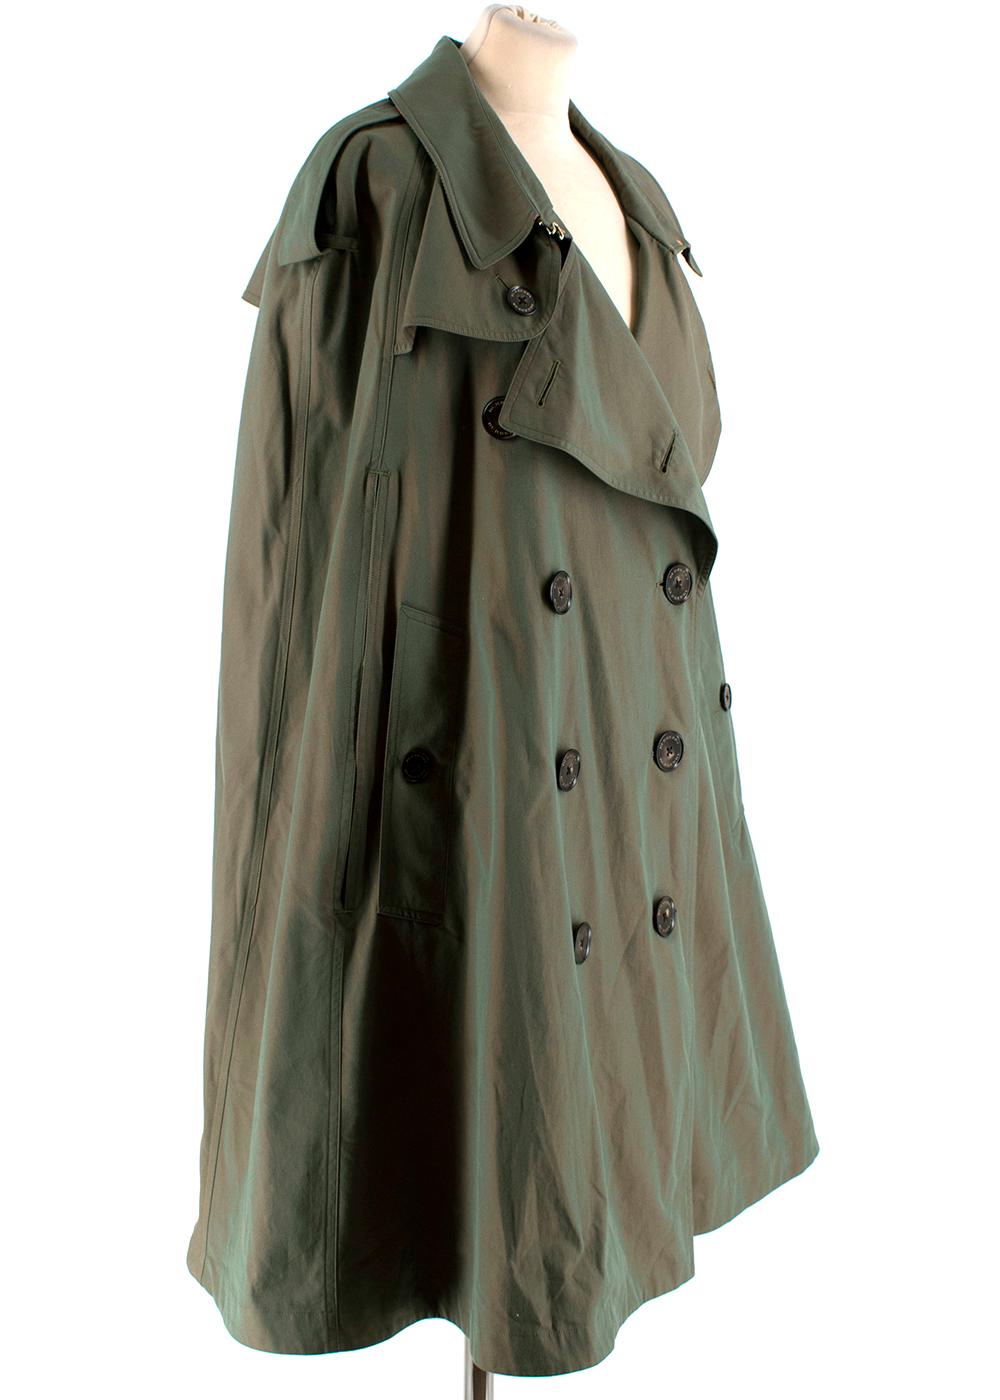 Burberry Green Cotton Trench Cape

-Double breasted classic design 
-Side slits for the arms 
-Military shoulder details as a reference to the trench origins 
-Iconic Burberry pattern to the lining 
-Branded button fastening to the front 
-2 outer